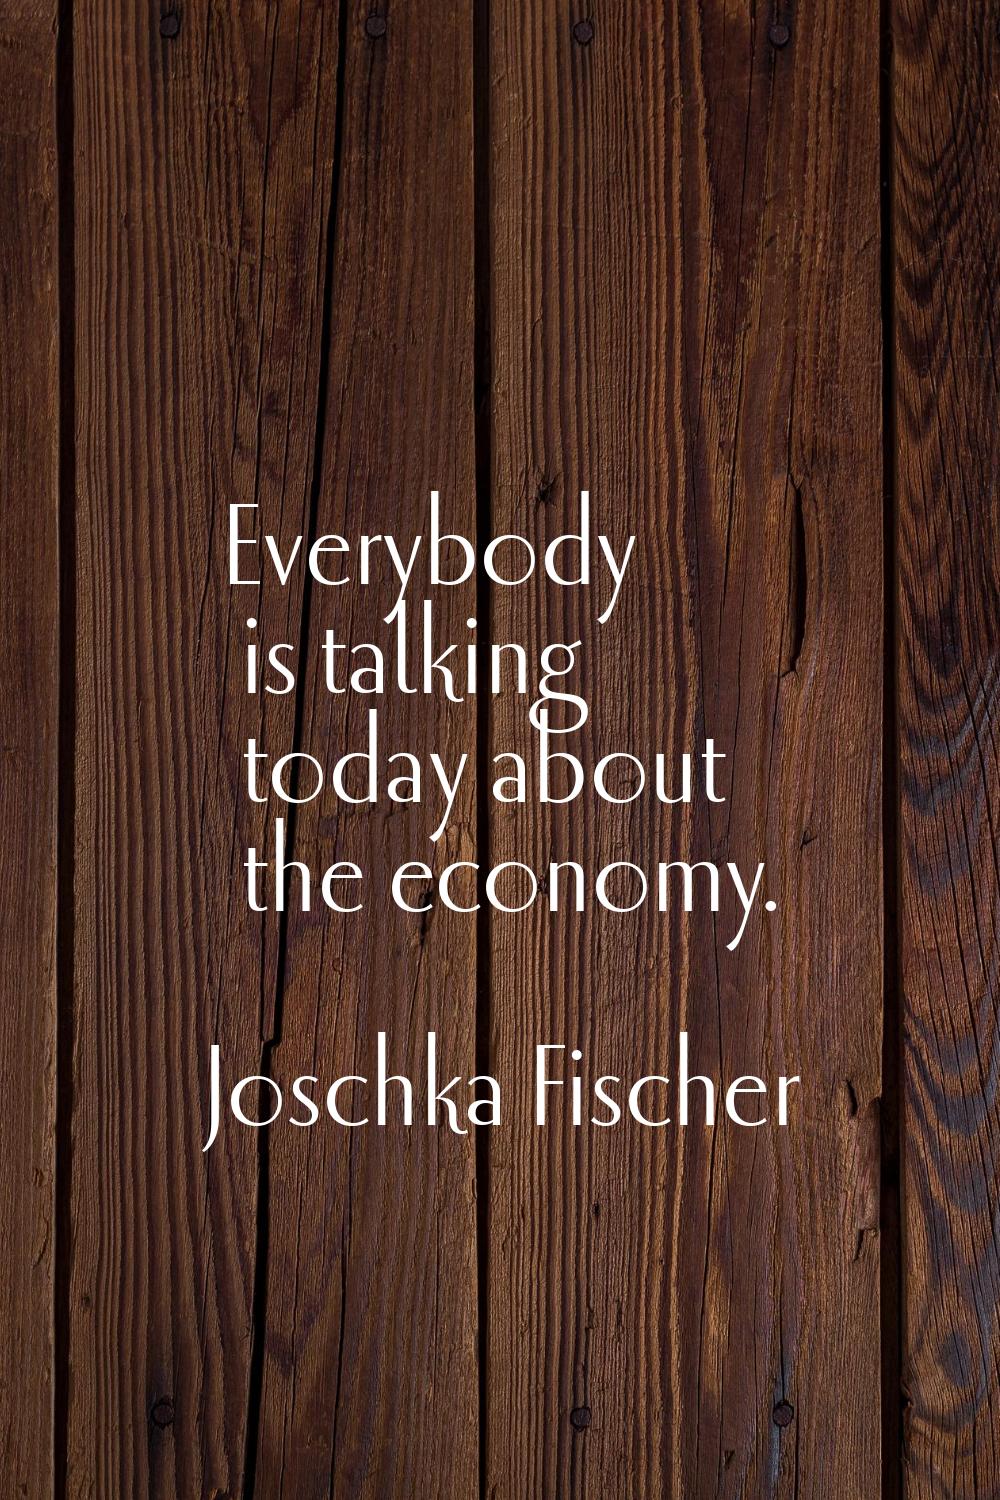 Everybody is talking today about the economy.